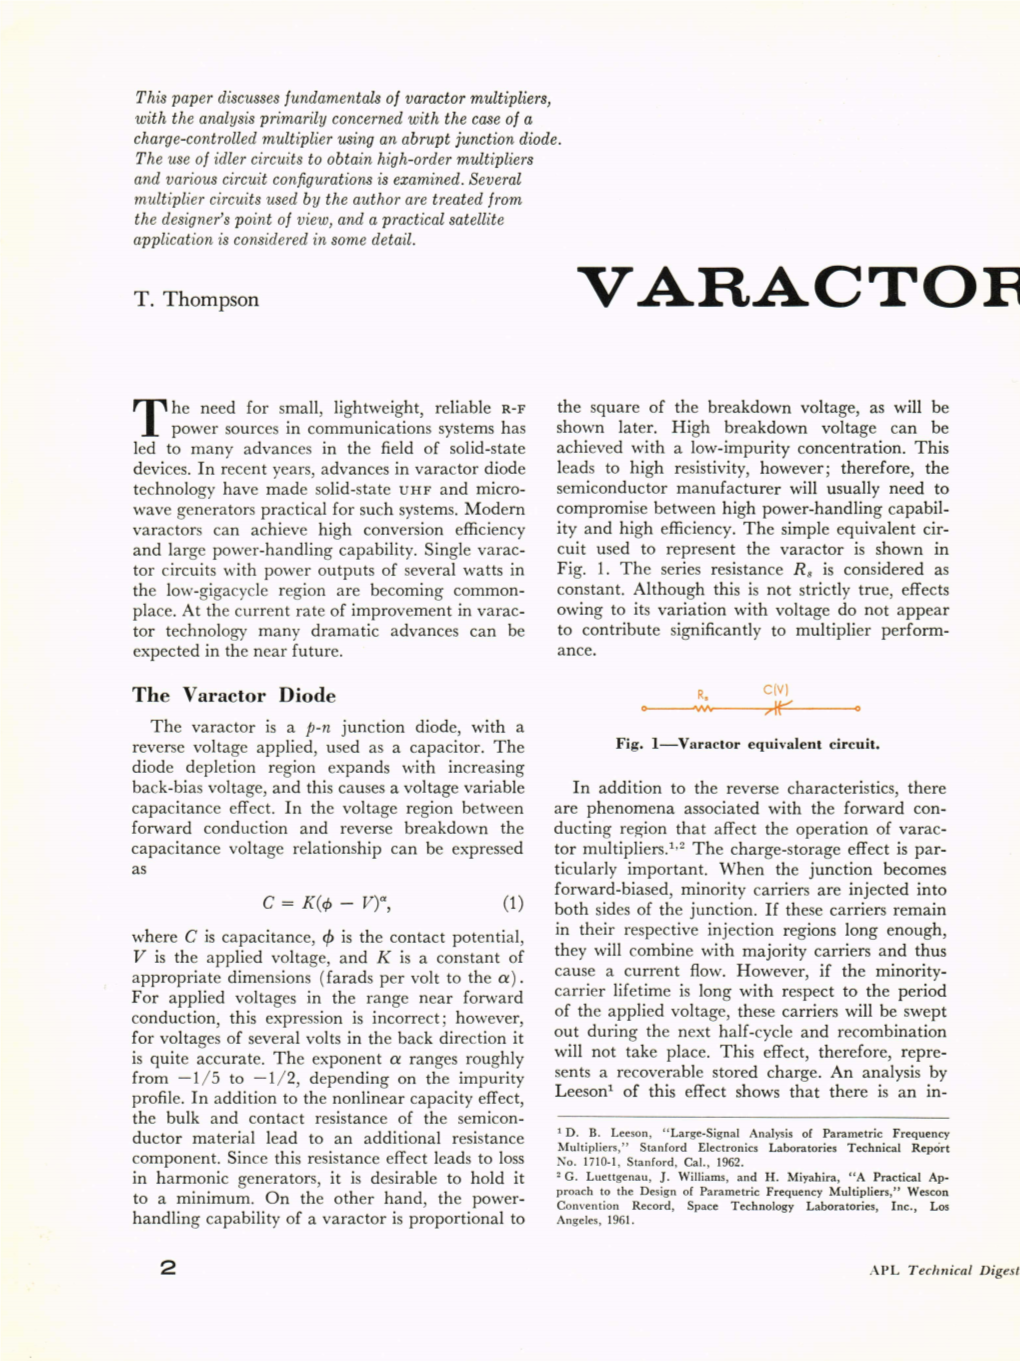 Varactor Multipliers, with the Analysis Primarily Concerned with the Case of a Charge-Controlled Multiplier Using an Abrupt Junction Diode